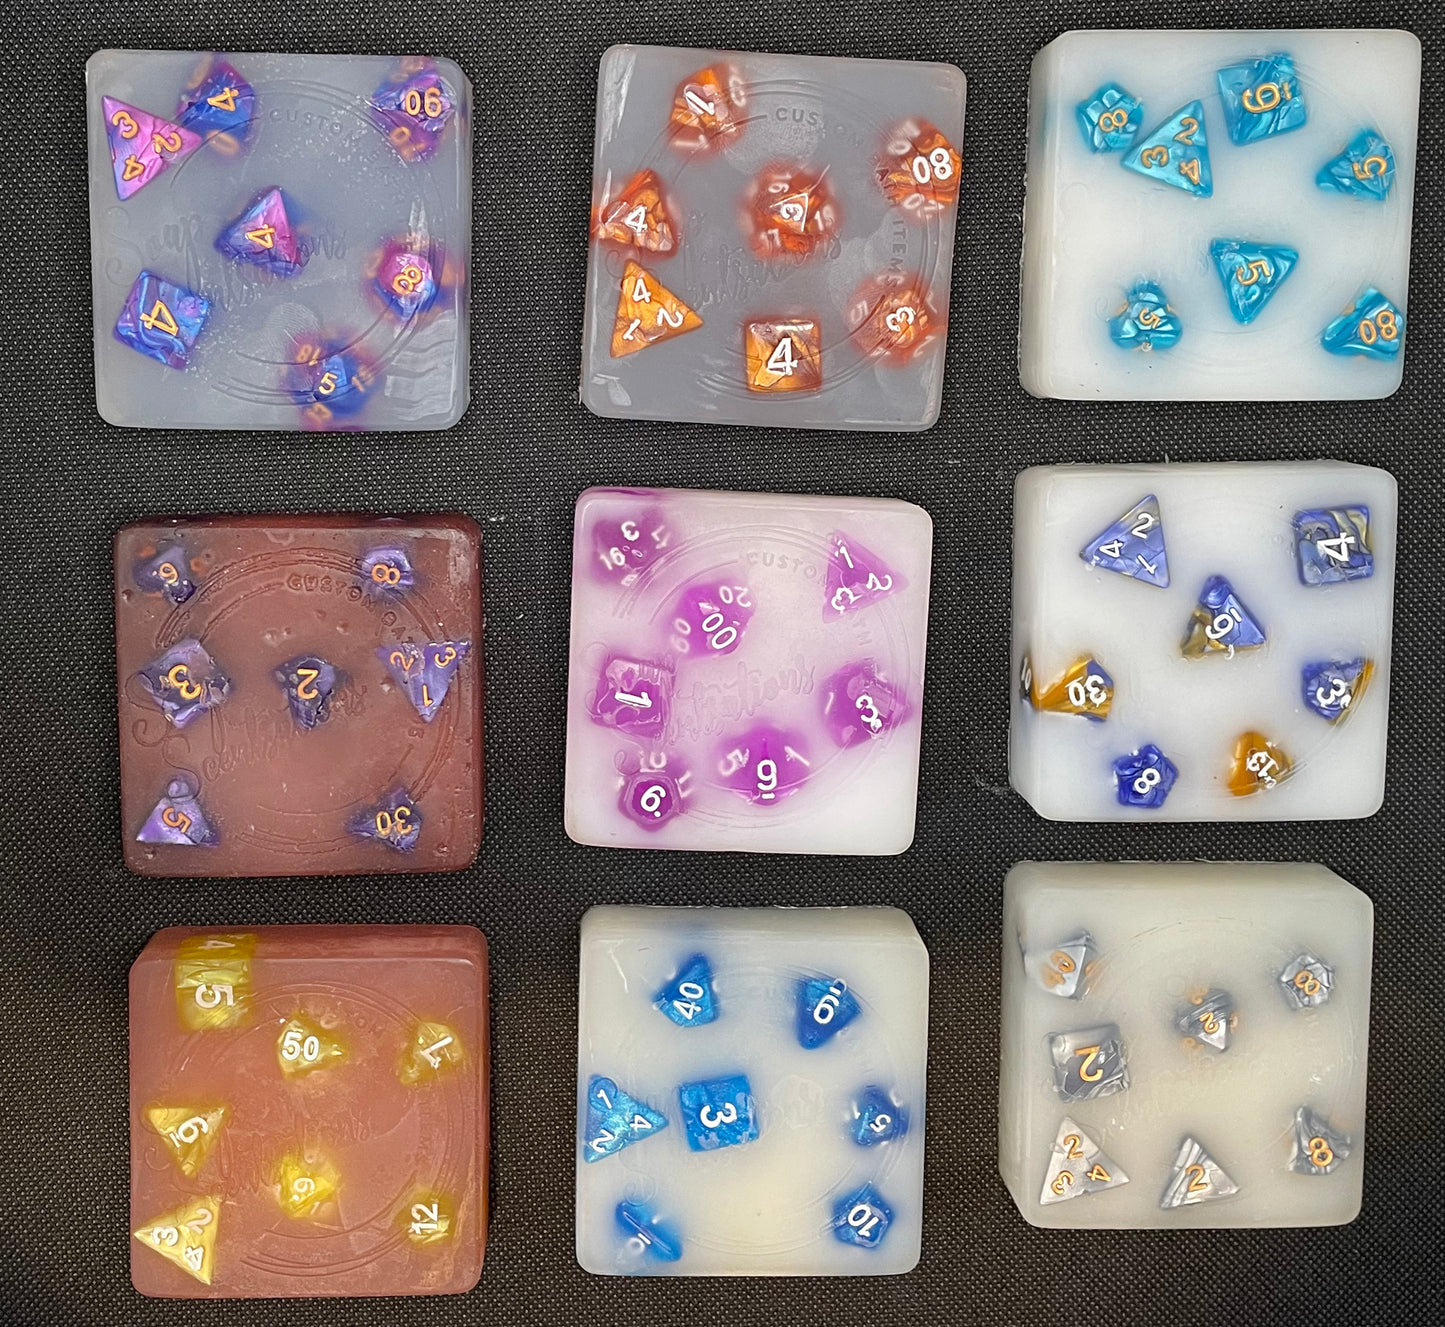 DnD Soap with Full Set of Dice Inside